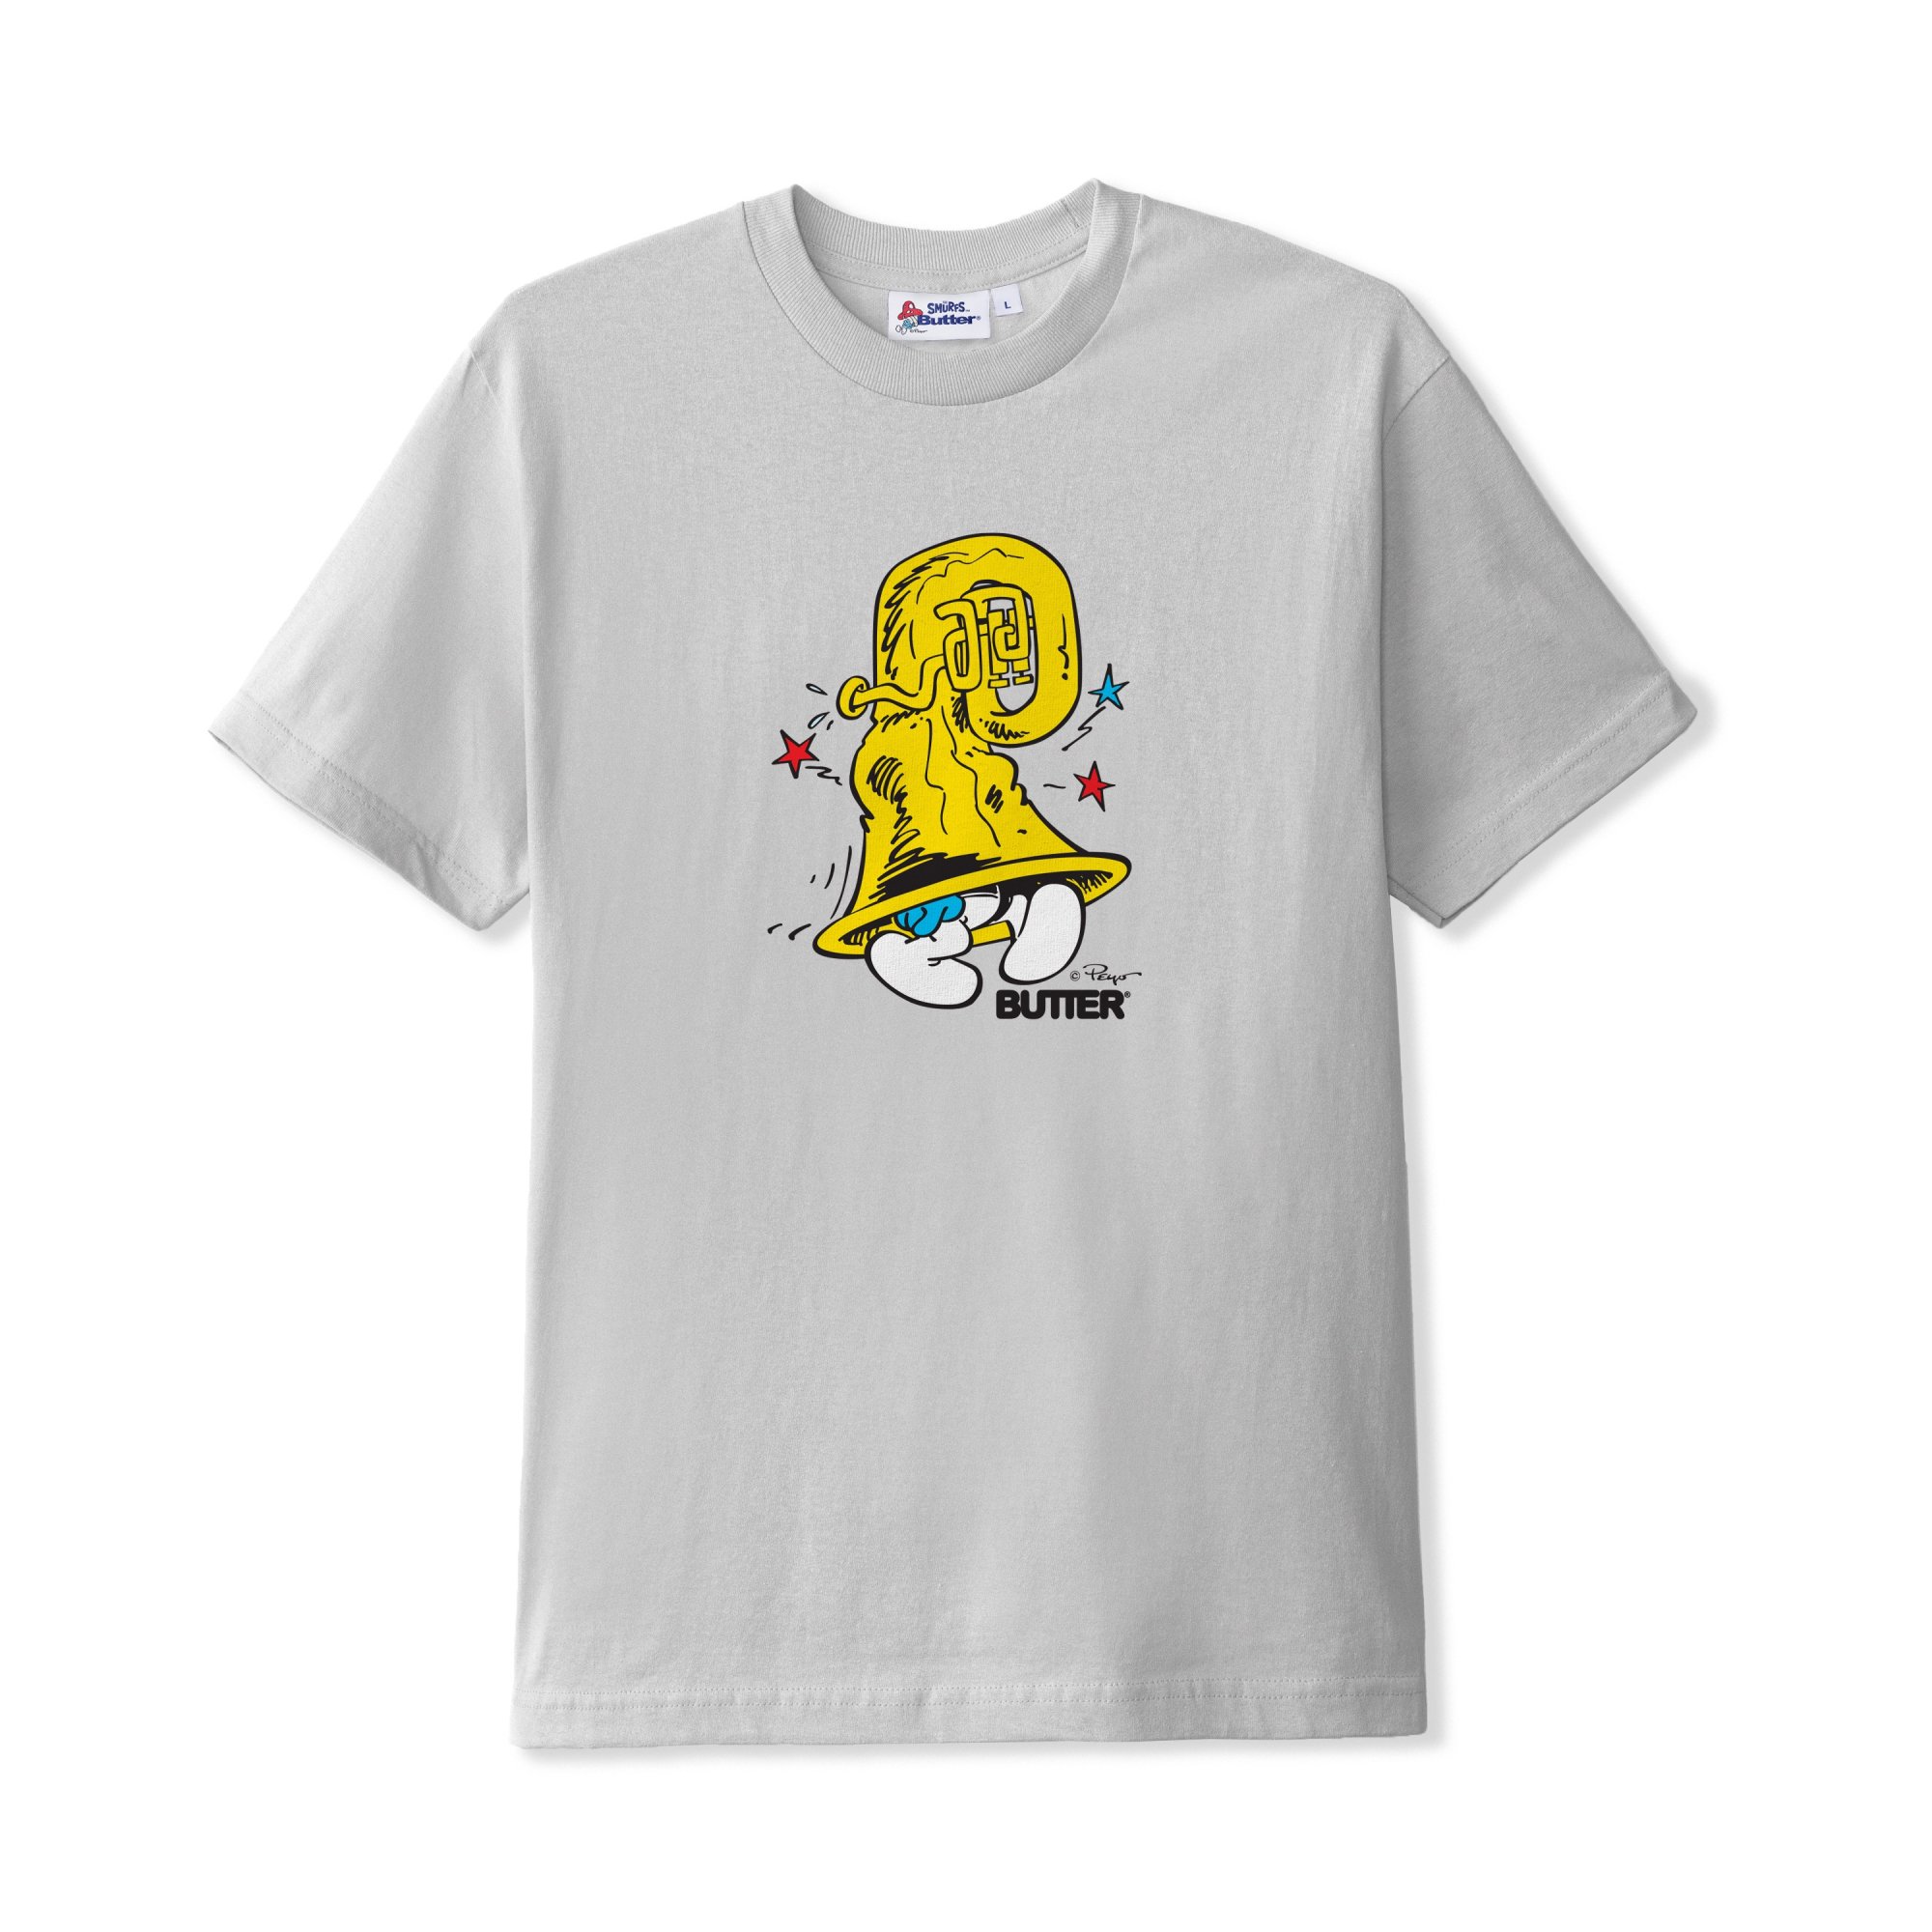 BUTTER GOODS×The Smurfs<br>Harmony Tee<br>